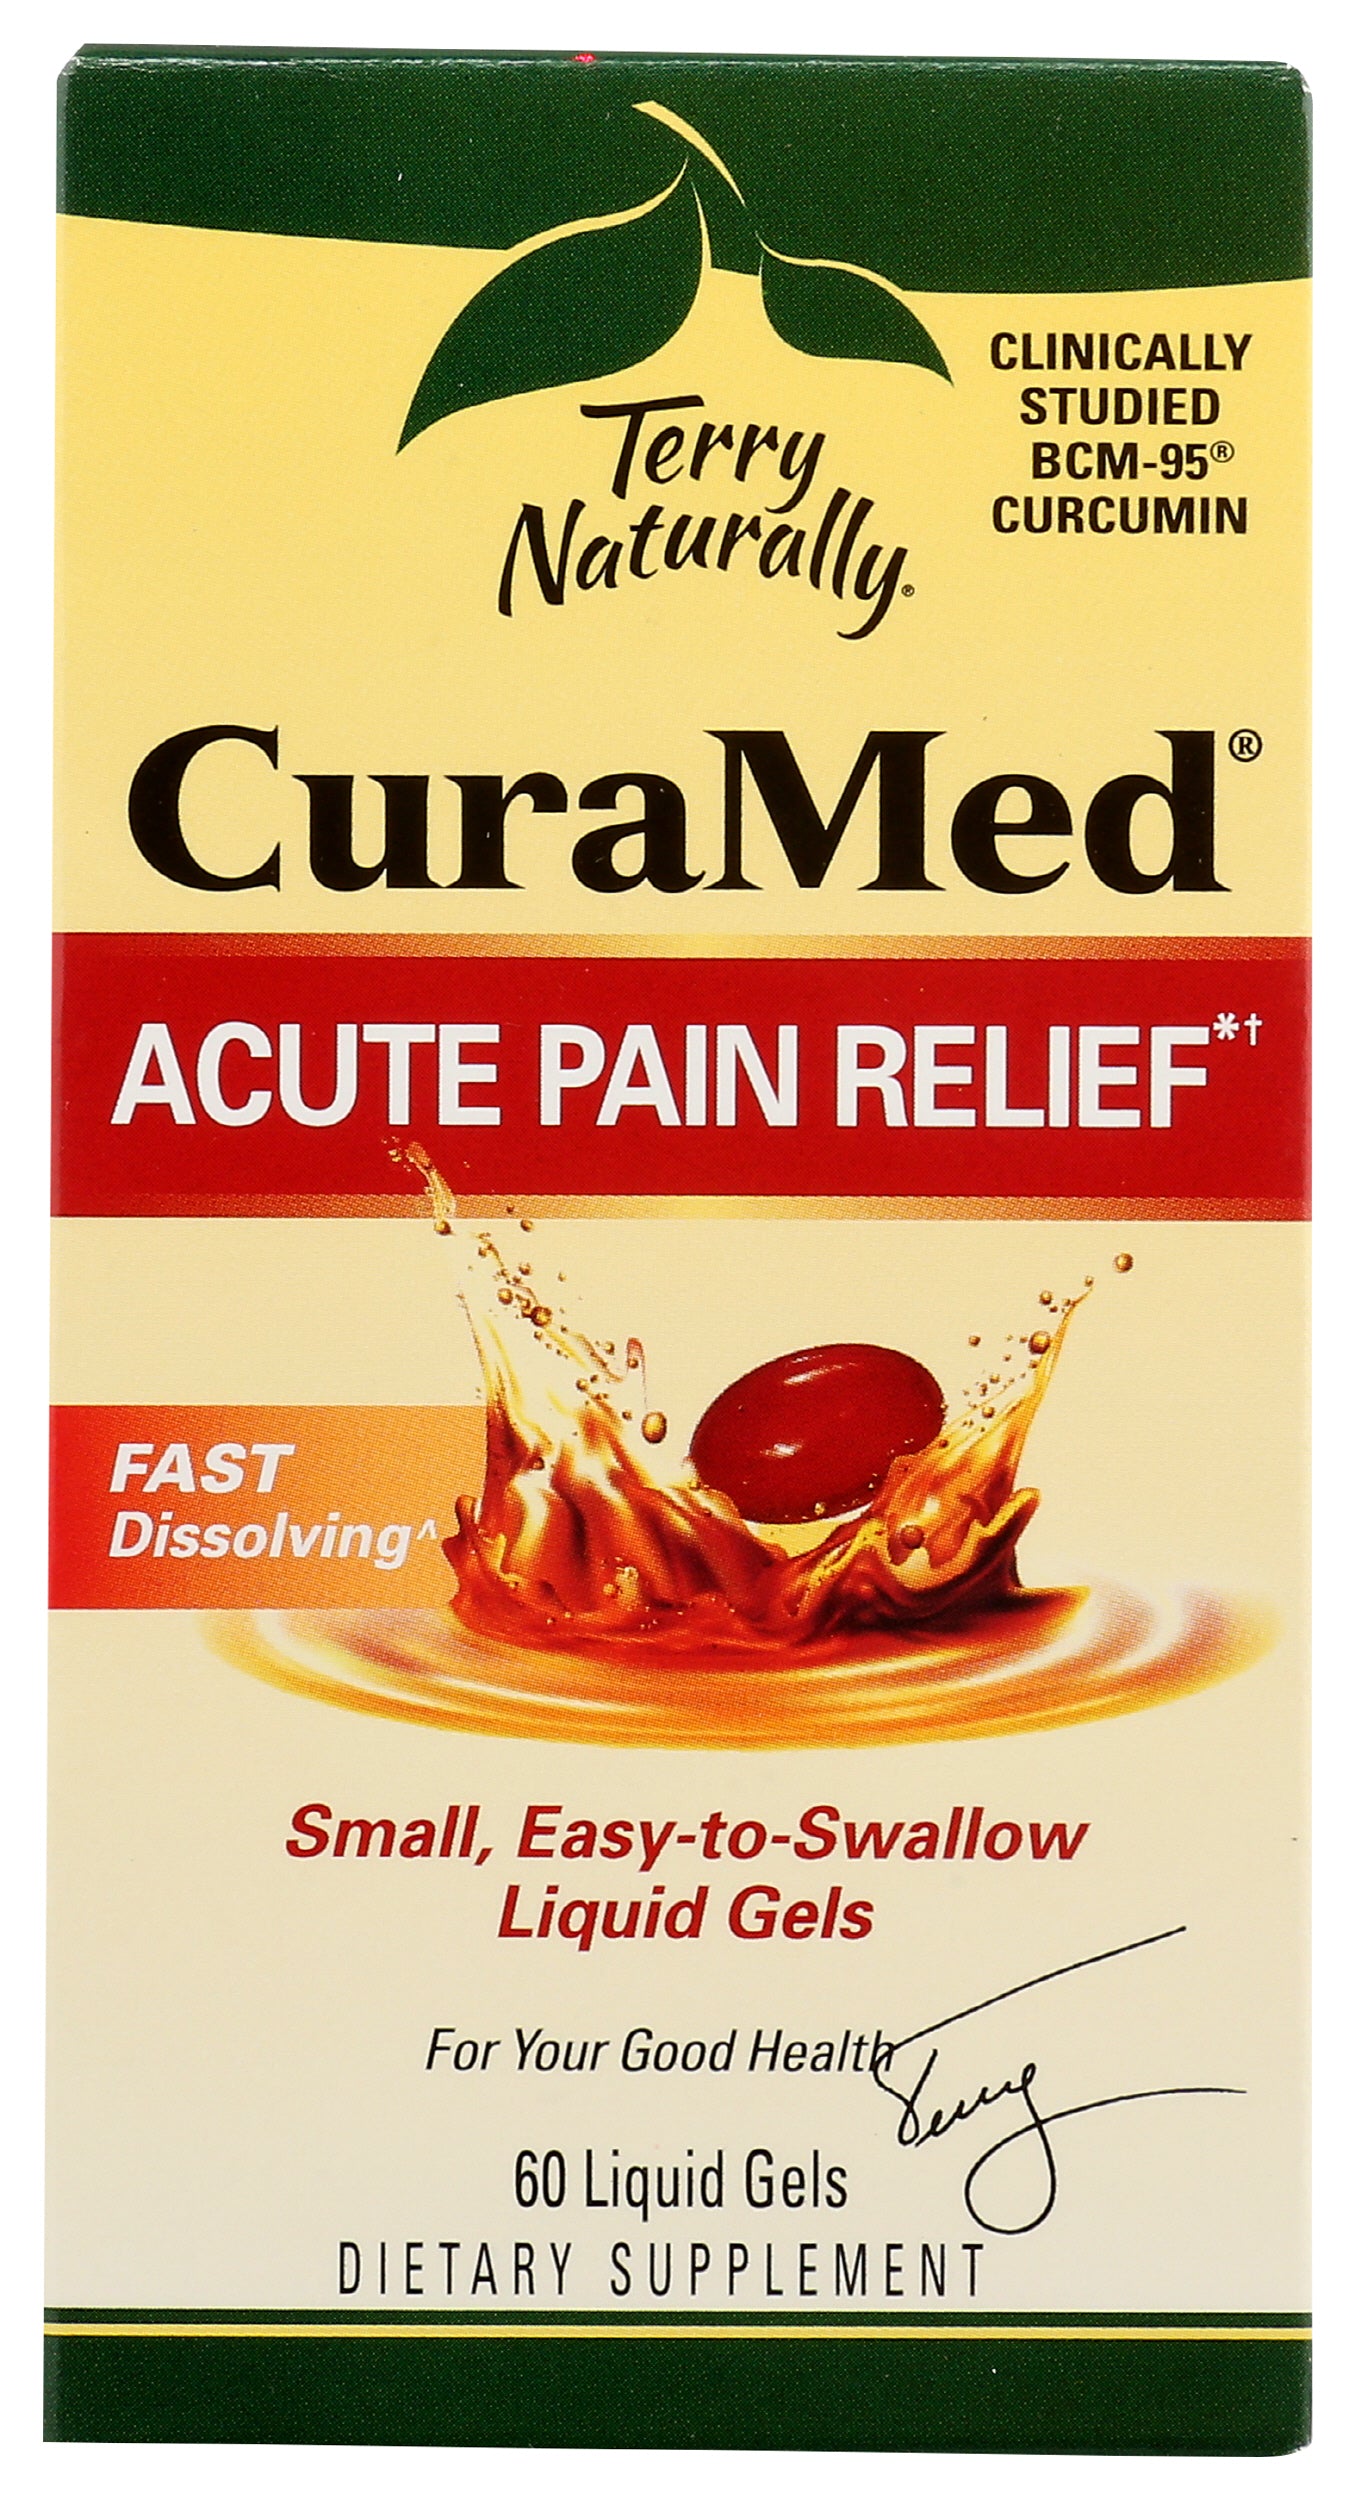 Terry Naturally CuraMed Acute Pain Relief 60 Liquid Gels Front of Box